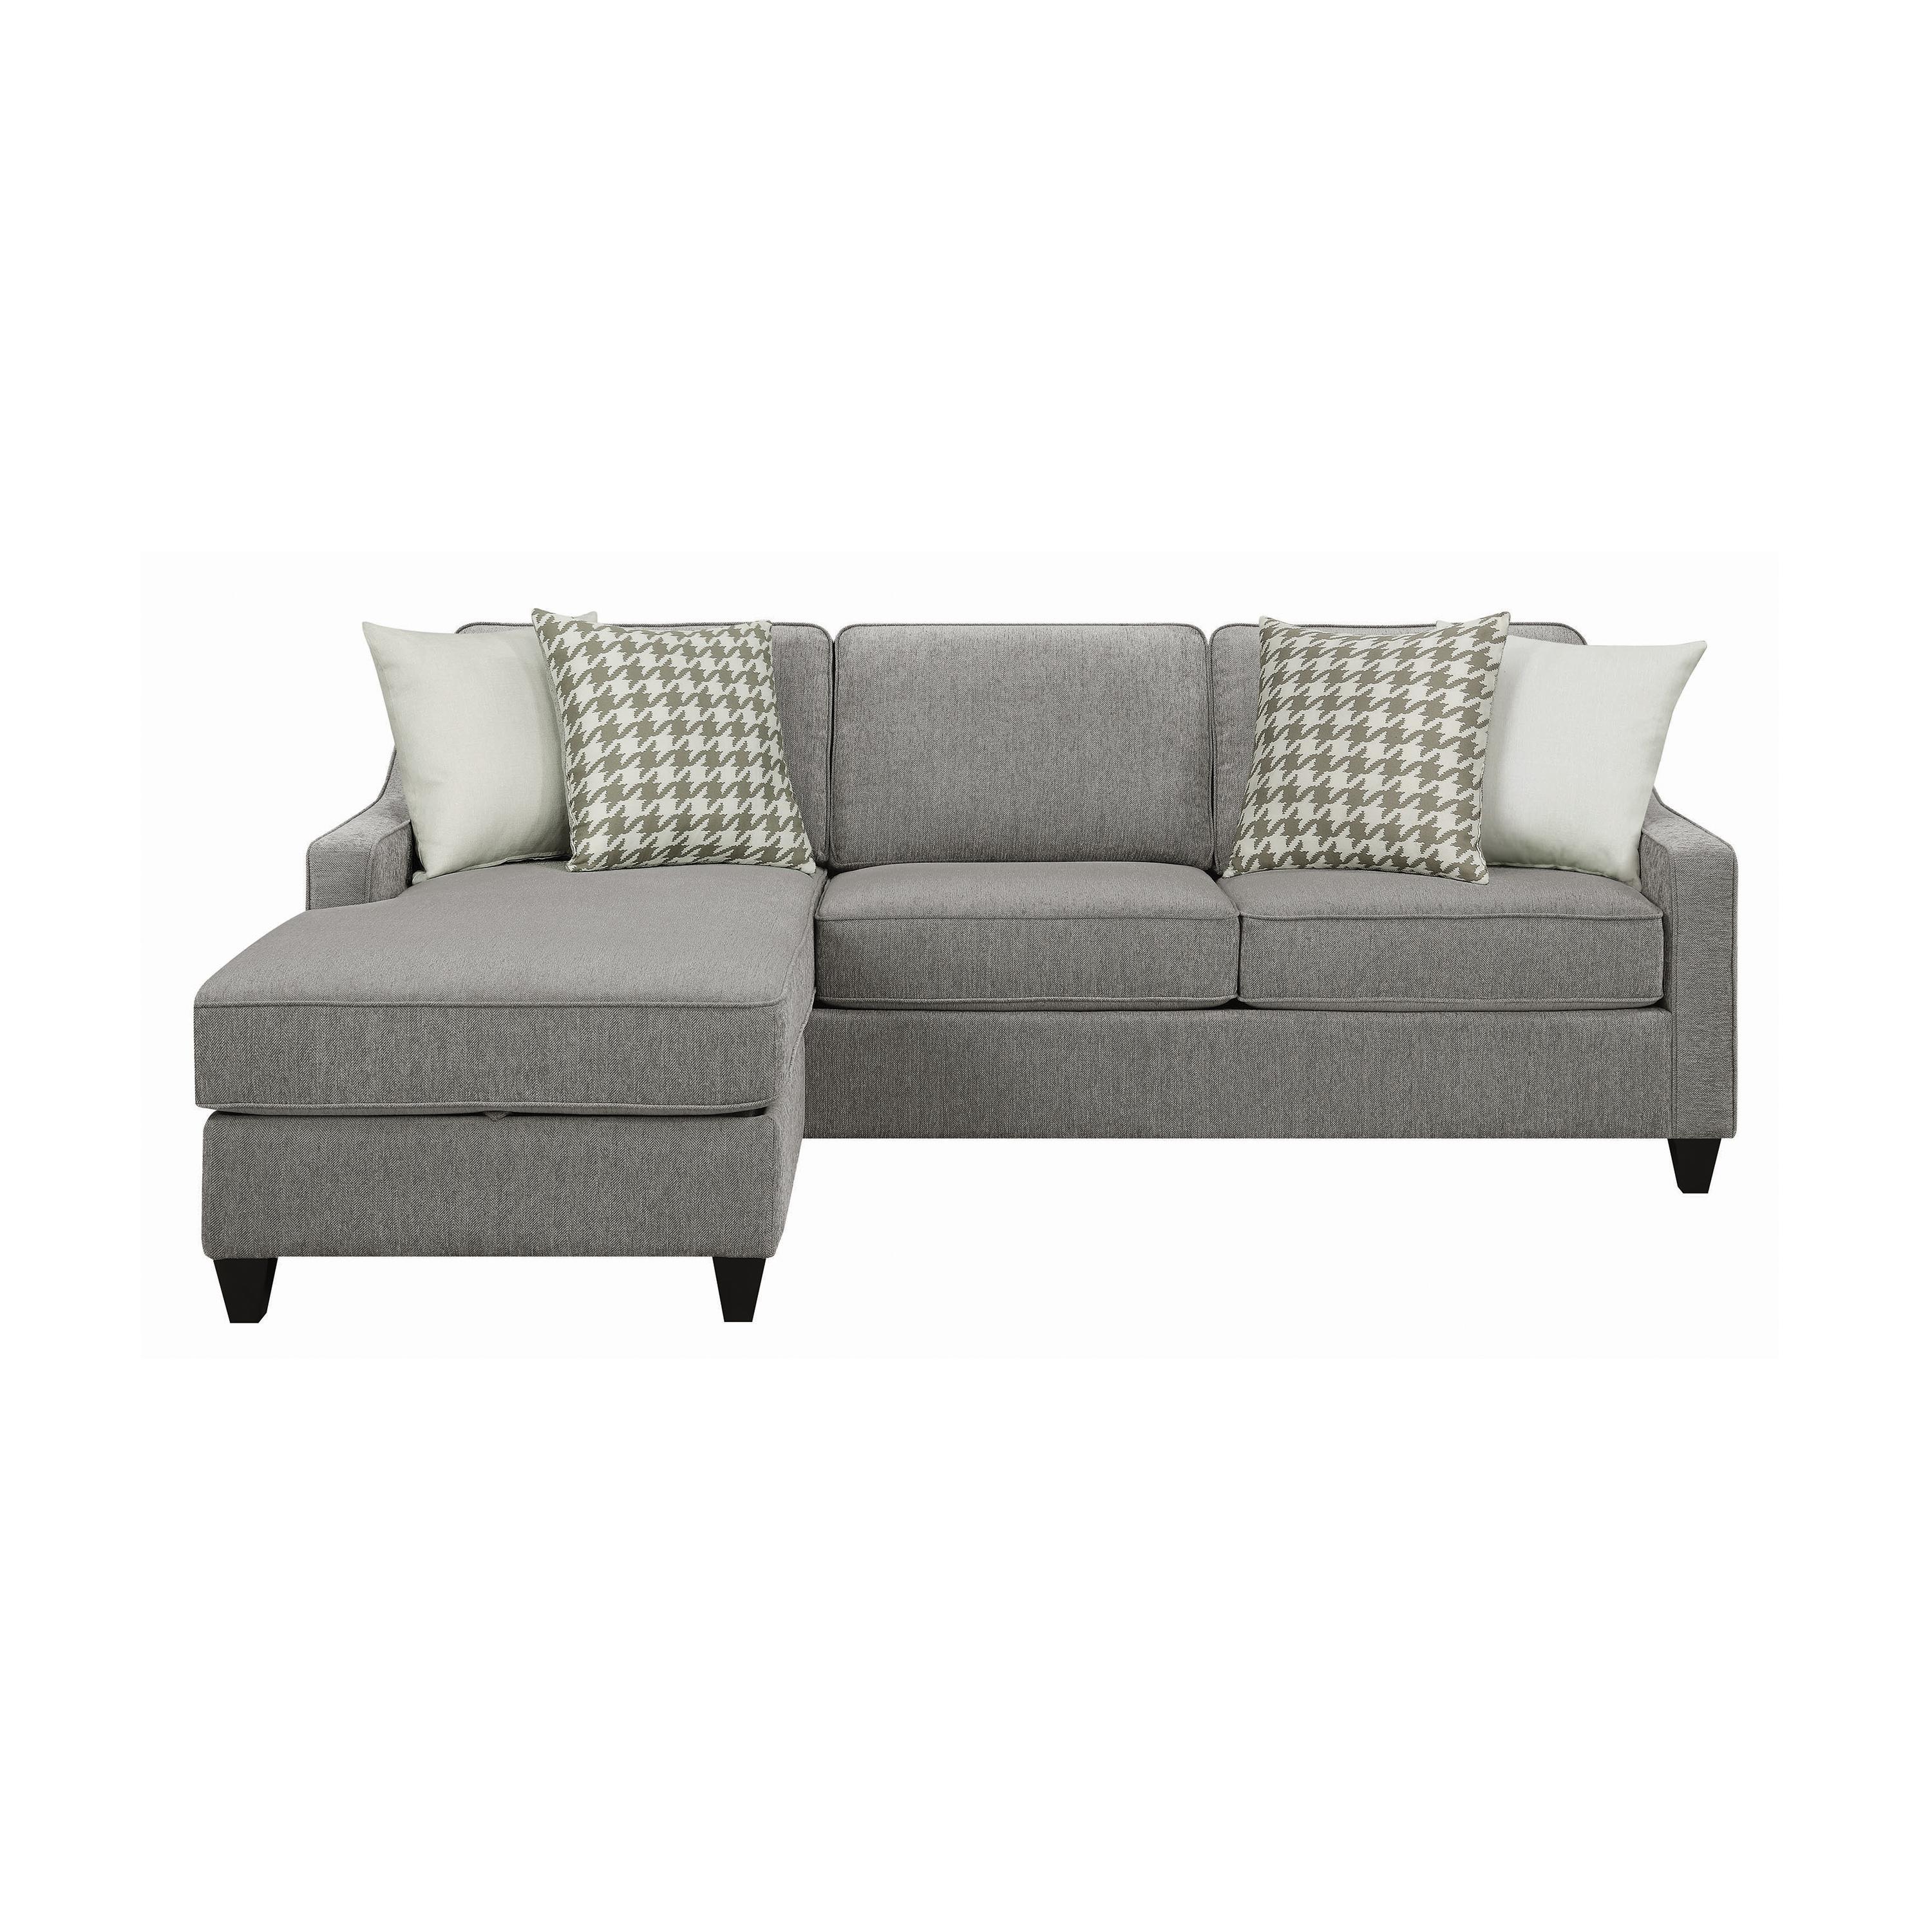 Transitional Sectional 502717 McLoughlin 502717 in Charcoal 